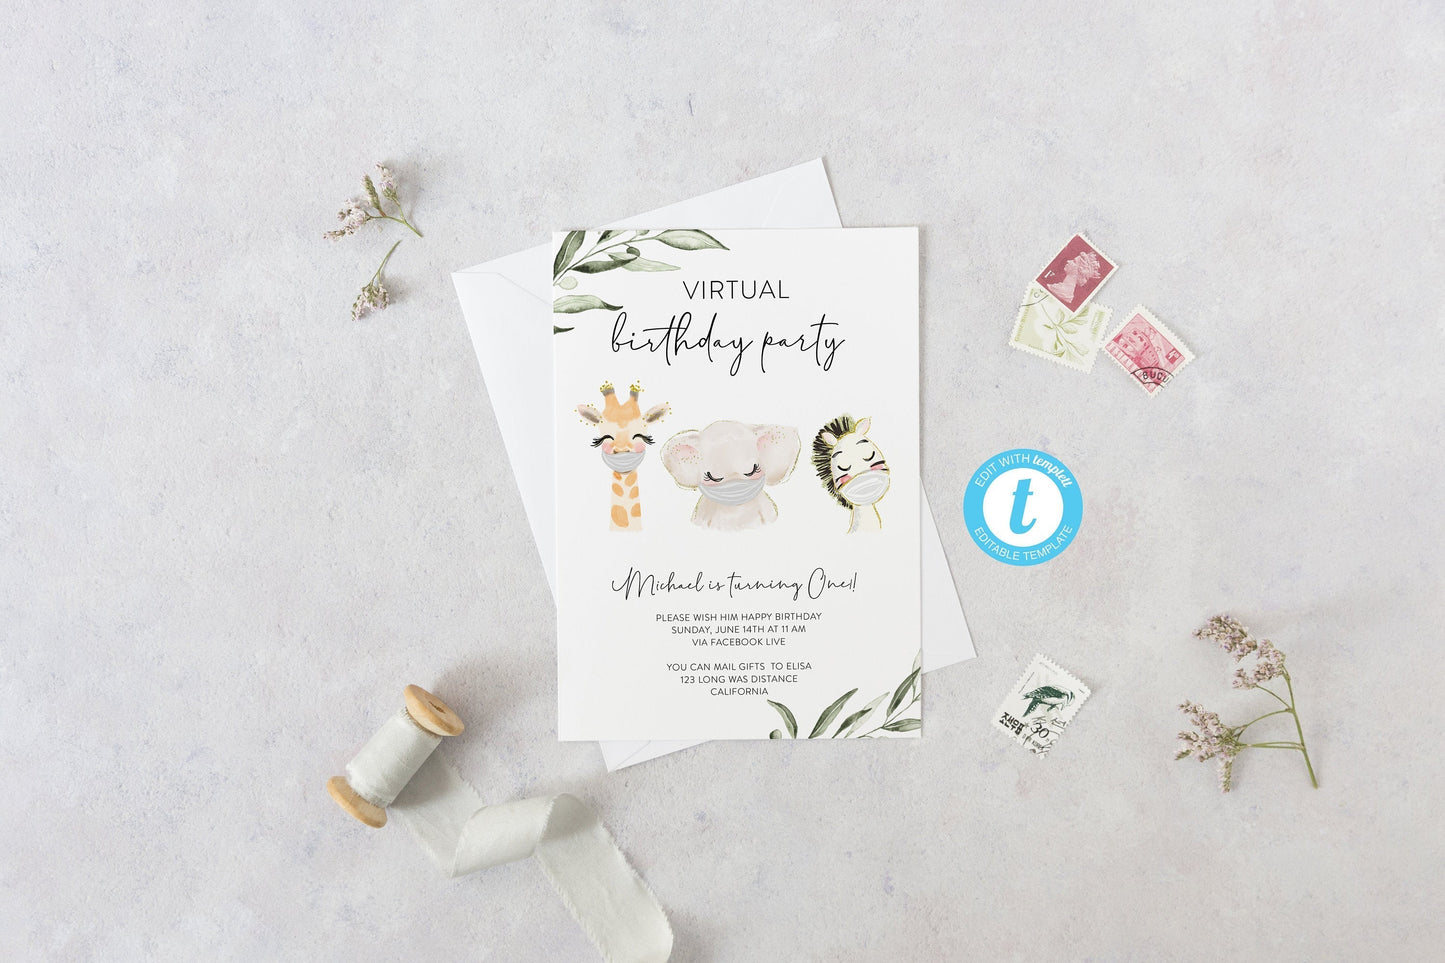 Editable Quarantine Birthday Invitation, Virtual Party Invitation, Woodland Editable Invite, Animals with face mask, Instant Download -Isla  SAVVY PAPER CO